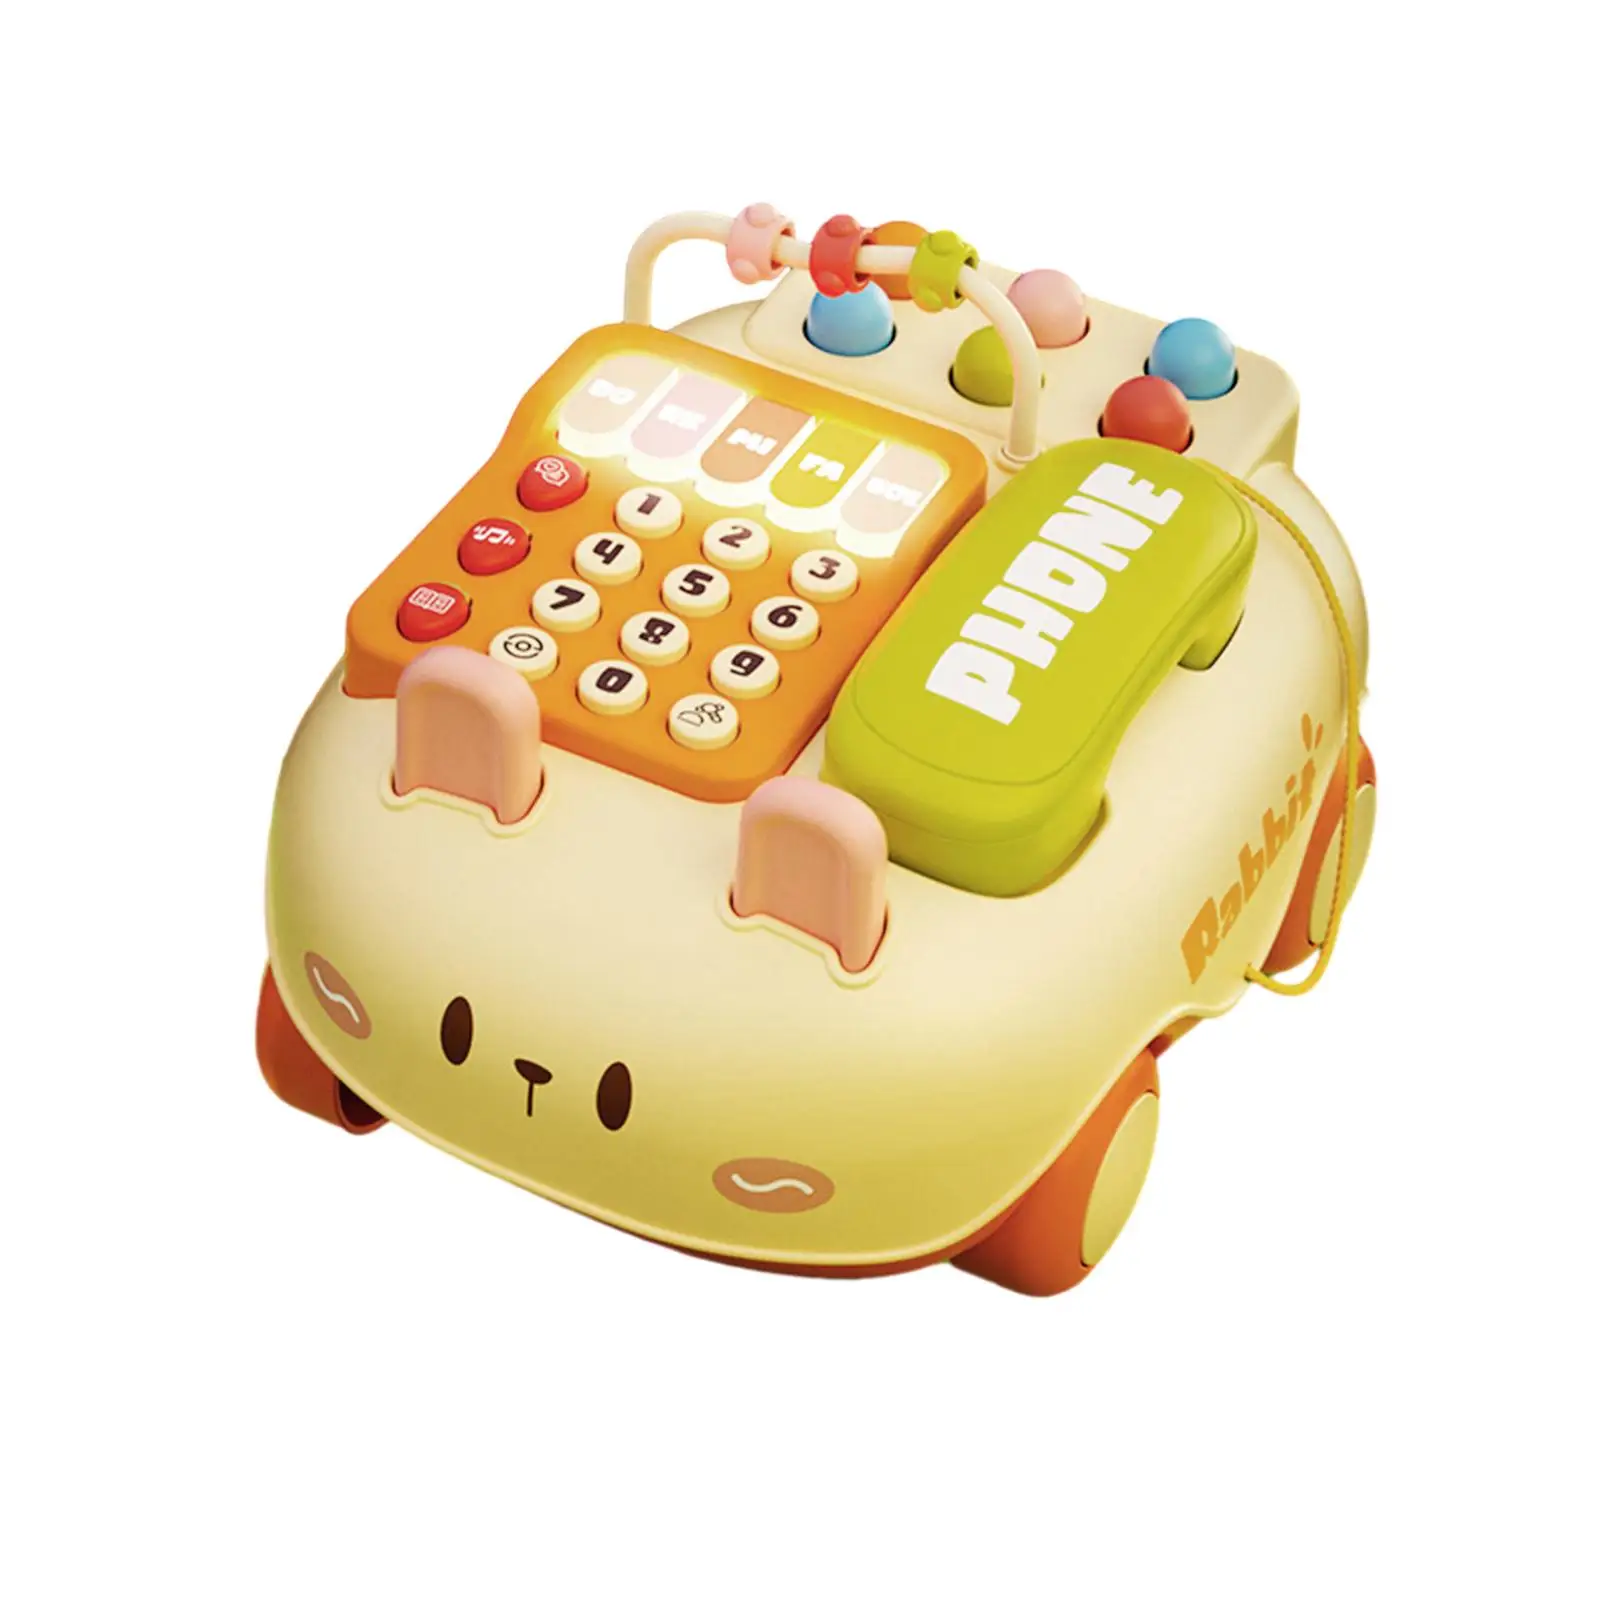 Baby Telephone Toy with Music and Lights Multifunction Baby Piano Parent Child Interactive Toy for Boys Baby Kids Birthday Gift